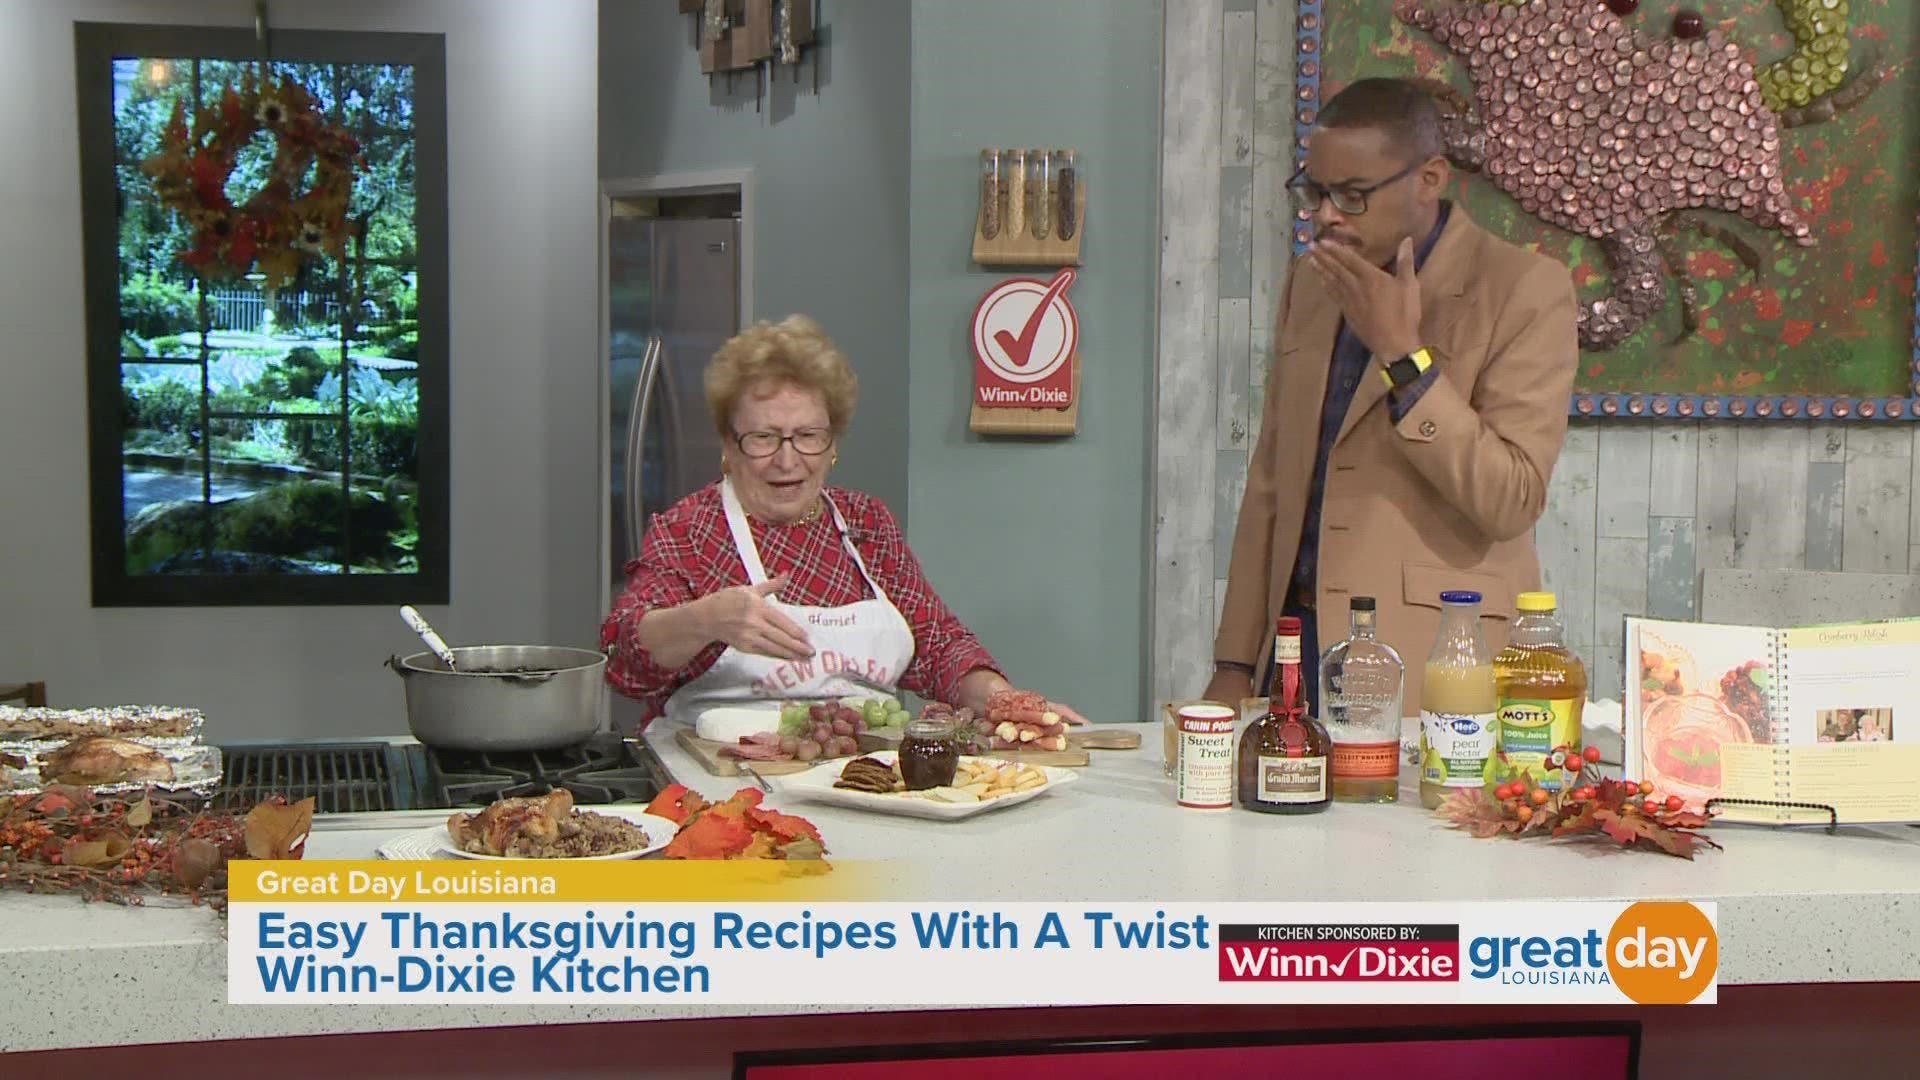 Harriet Robin of the New Orleans School of Cooking shared a recipe for an appetizer and cocktail for Thanksgiving.